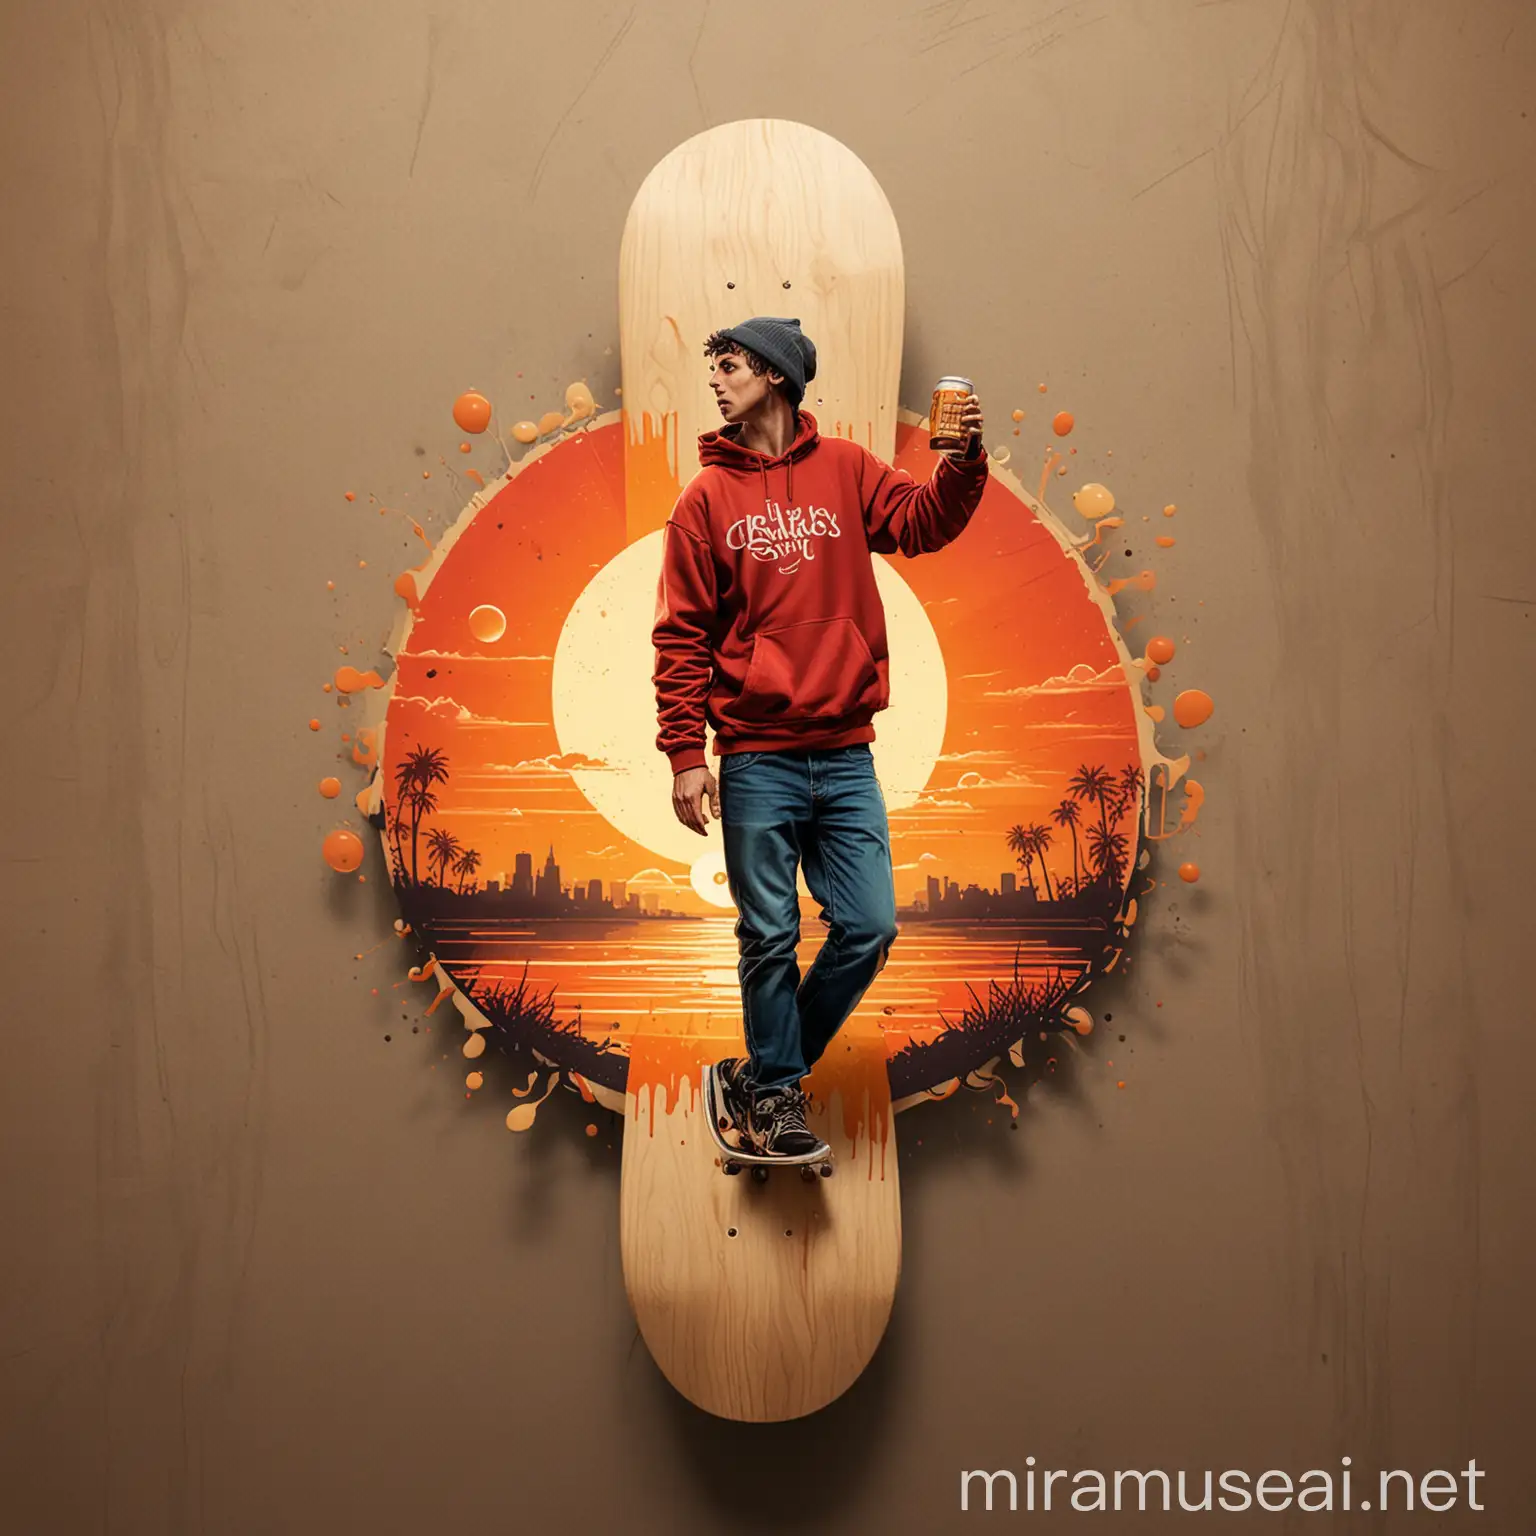 Create a detailed illustrated beer label with the following elements:

Background: A vibrant sunset gradient with two large suns, one orange and one red, setting on a hazy horizon. Blend the colors seamlessly for a realistic sunset effect.
Center Image: A dynamic silhouette of a person with a skateboard in their hand, mid-kickflip. Capture the energy and motion of the trick by emphasizing the board's upward angle and the person's outstretched limbs.
Text:
Top, centered: "Twin Suns Brewery" in a bold, retro font. Imagine a classic, slightly condensed font with thick, rounded edges, similar to fonts like "Futura Bold Condensed" or "Bebas Neue Bold."
Below the image, centered: "Teenage Dirtbag" in a large, graffiti-style font with a slight drip effect. Use bold, thick outlines with a spray-painted aesthetic, similar to street art styles. Add a subtle dripping effect on the letters for a dynamic touch.
Below "Teenage Dirtbag," centered: "American Wheat Beer" in a smaller, clear font. Choose a simple, legible font that complements the other styles, such as "Open Sans" or "Helvetica Neue Light."